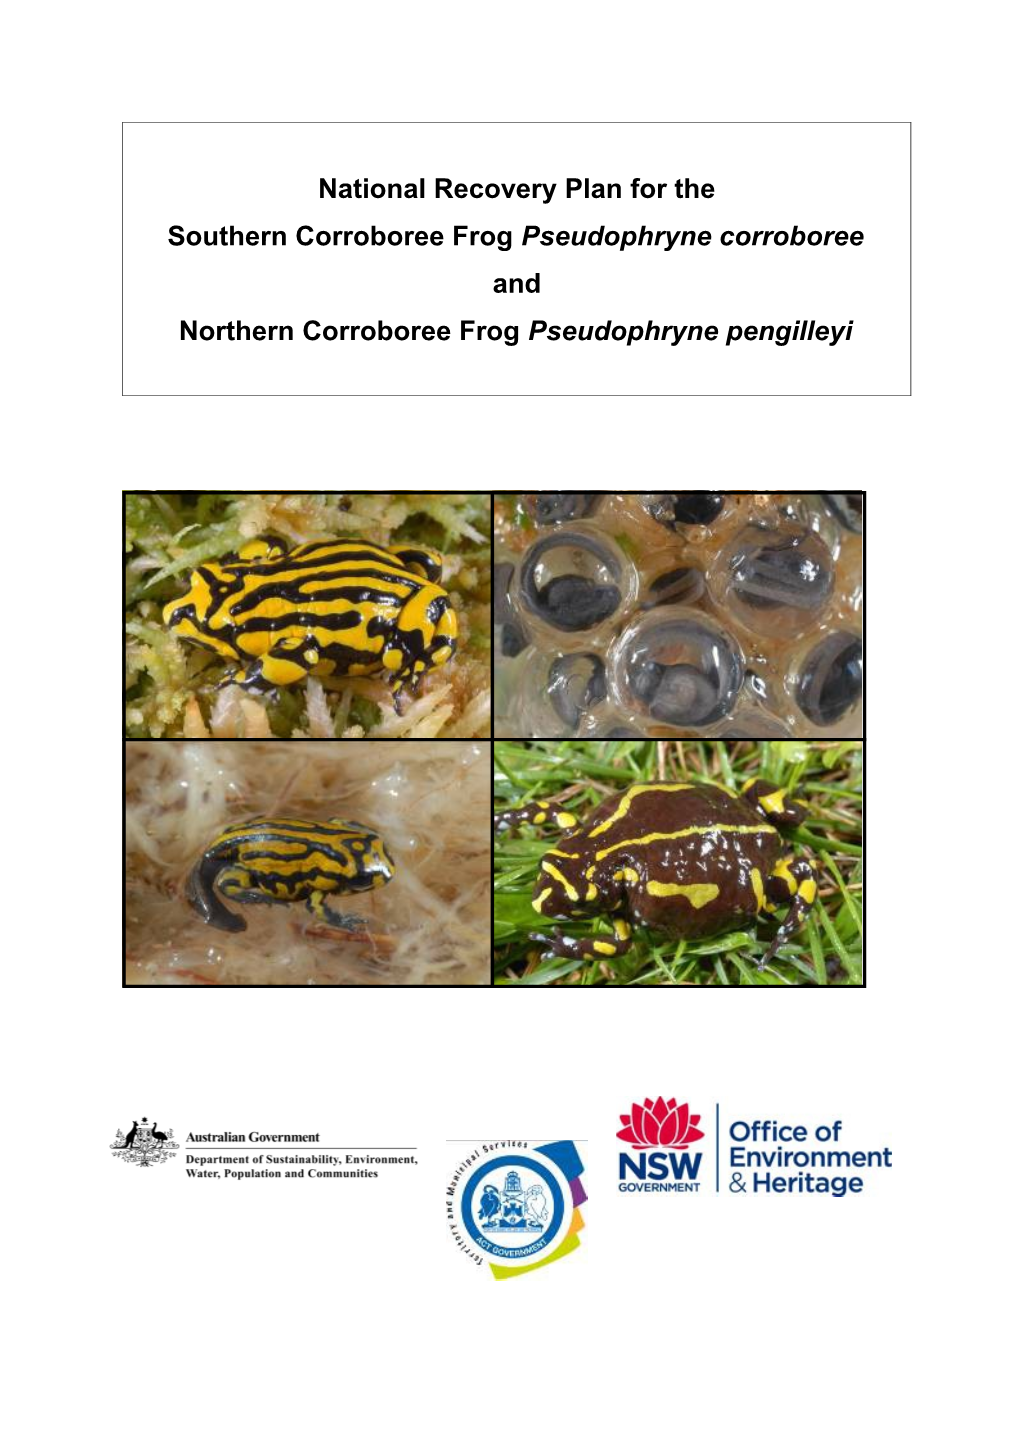 National Recovery Plan for the Southern Corroboree Frog Pseudophryne Corroboree and Northern